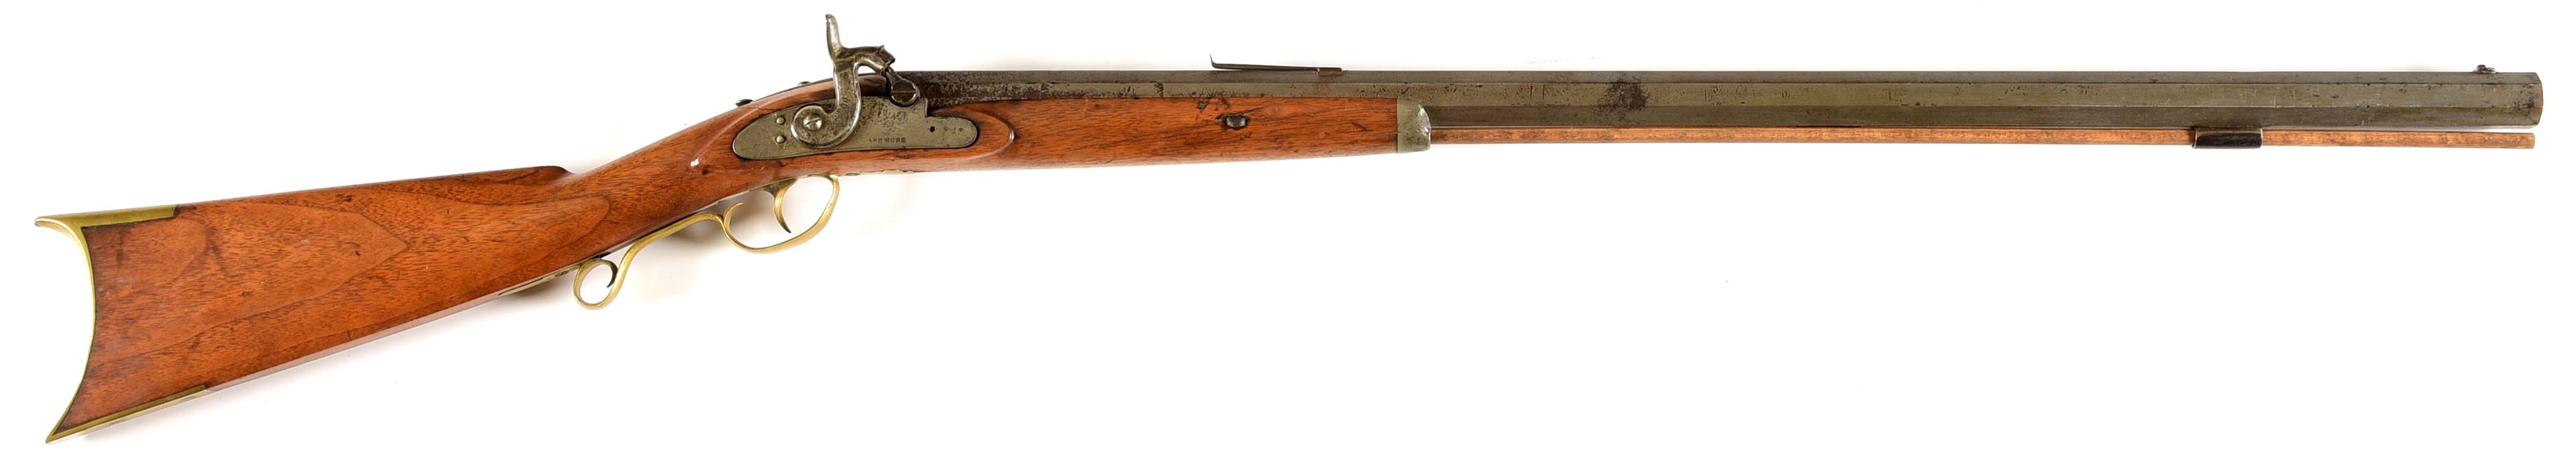 (A) GEO. L. HOLMES PERCUSSION RIFLE WITH REMINGTON BARREL.